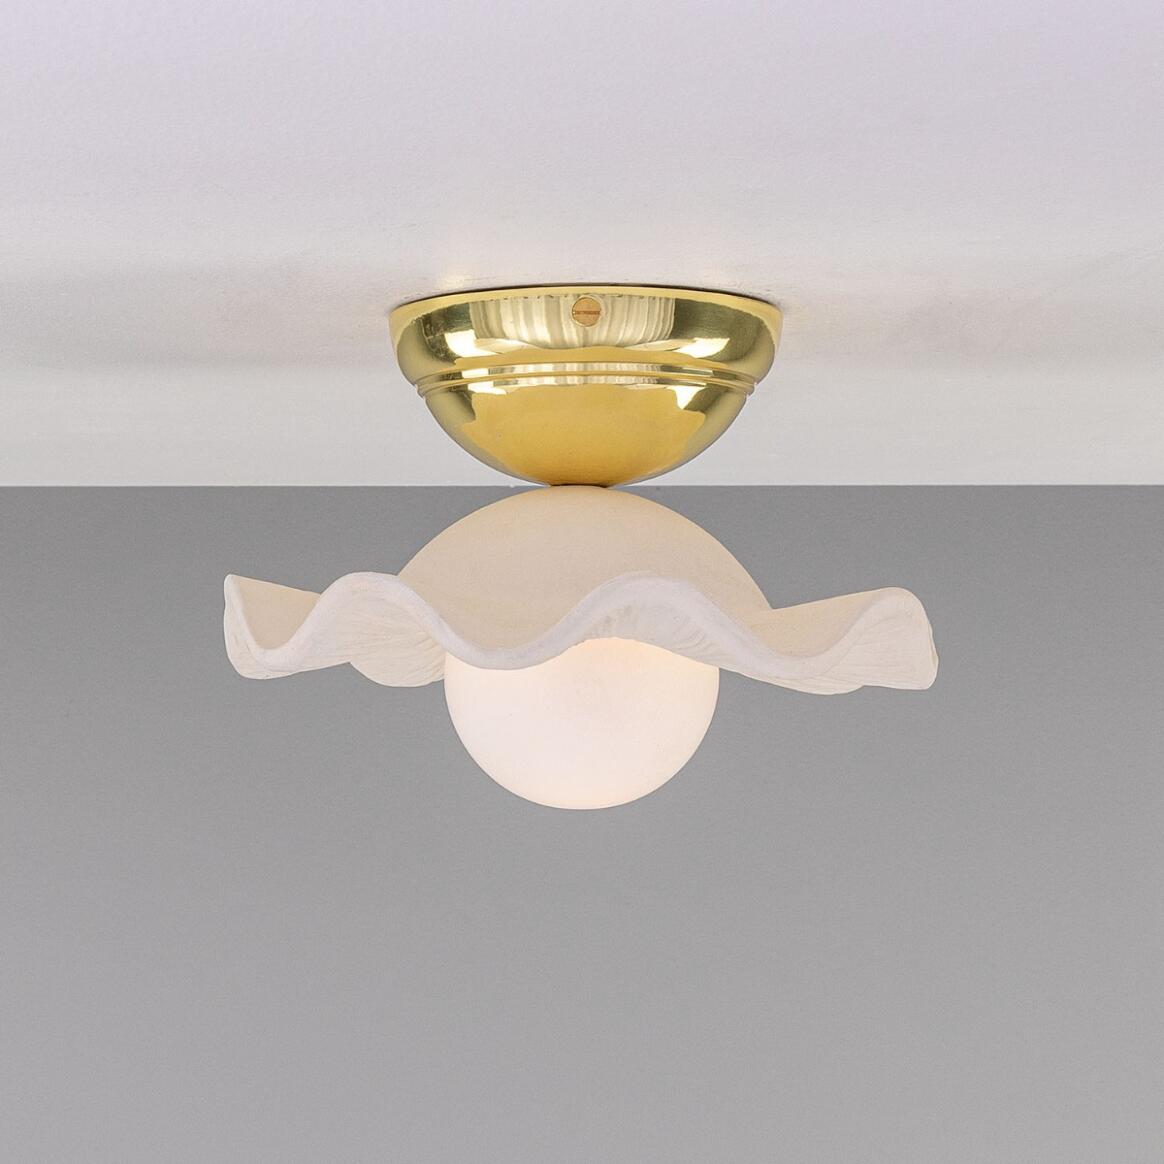 Rivale Ceiling Light with Wavy Ceramic Shade, Matte White Striped main product image